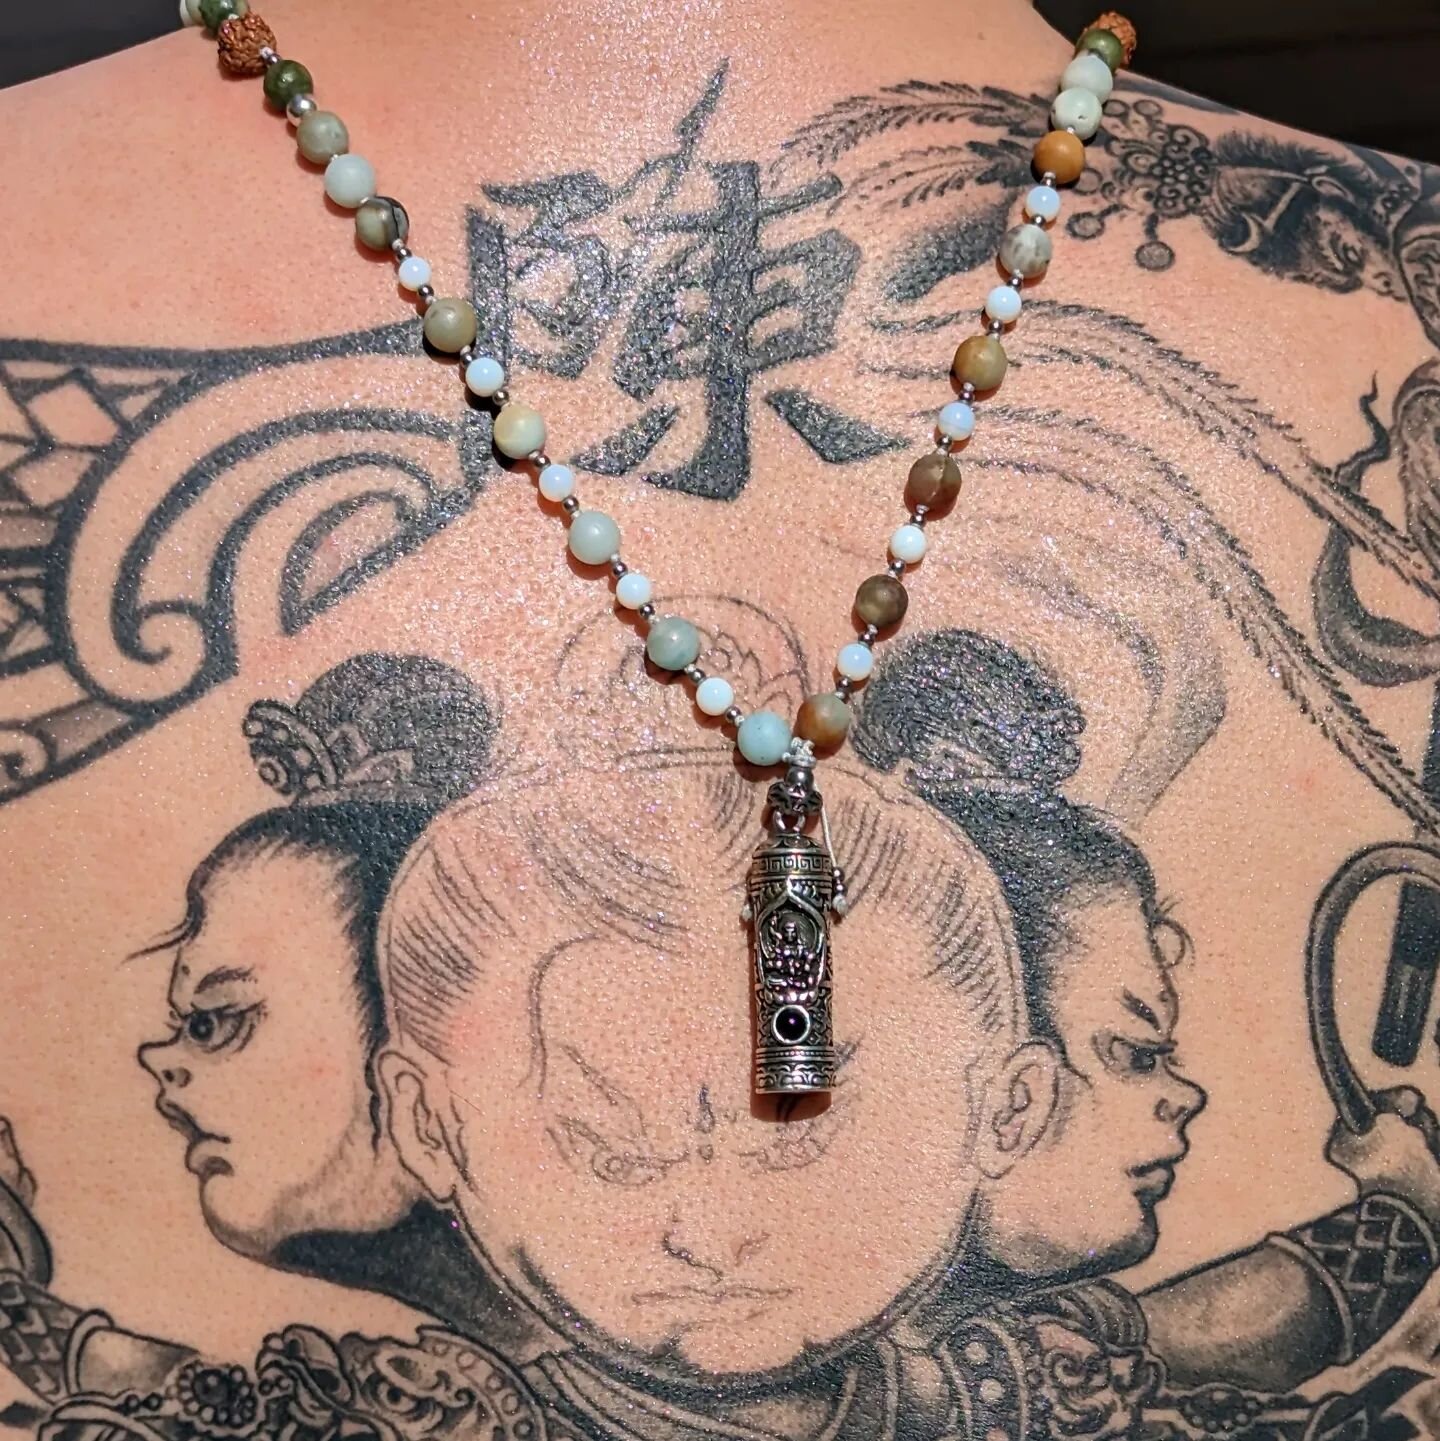 Art
In any fashion, bring it together with this Buddha carver crystal prayer holder pendant and amazonite, moonstone and rudraksha seed mala. Empowerment, calm and truth.
#lawofattraction #peace #puertovallarta #almar #yoga #intentionsetting #love #i